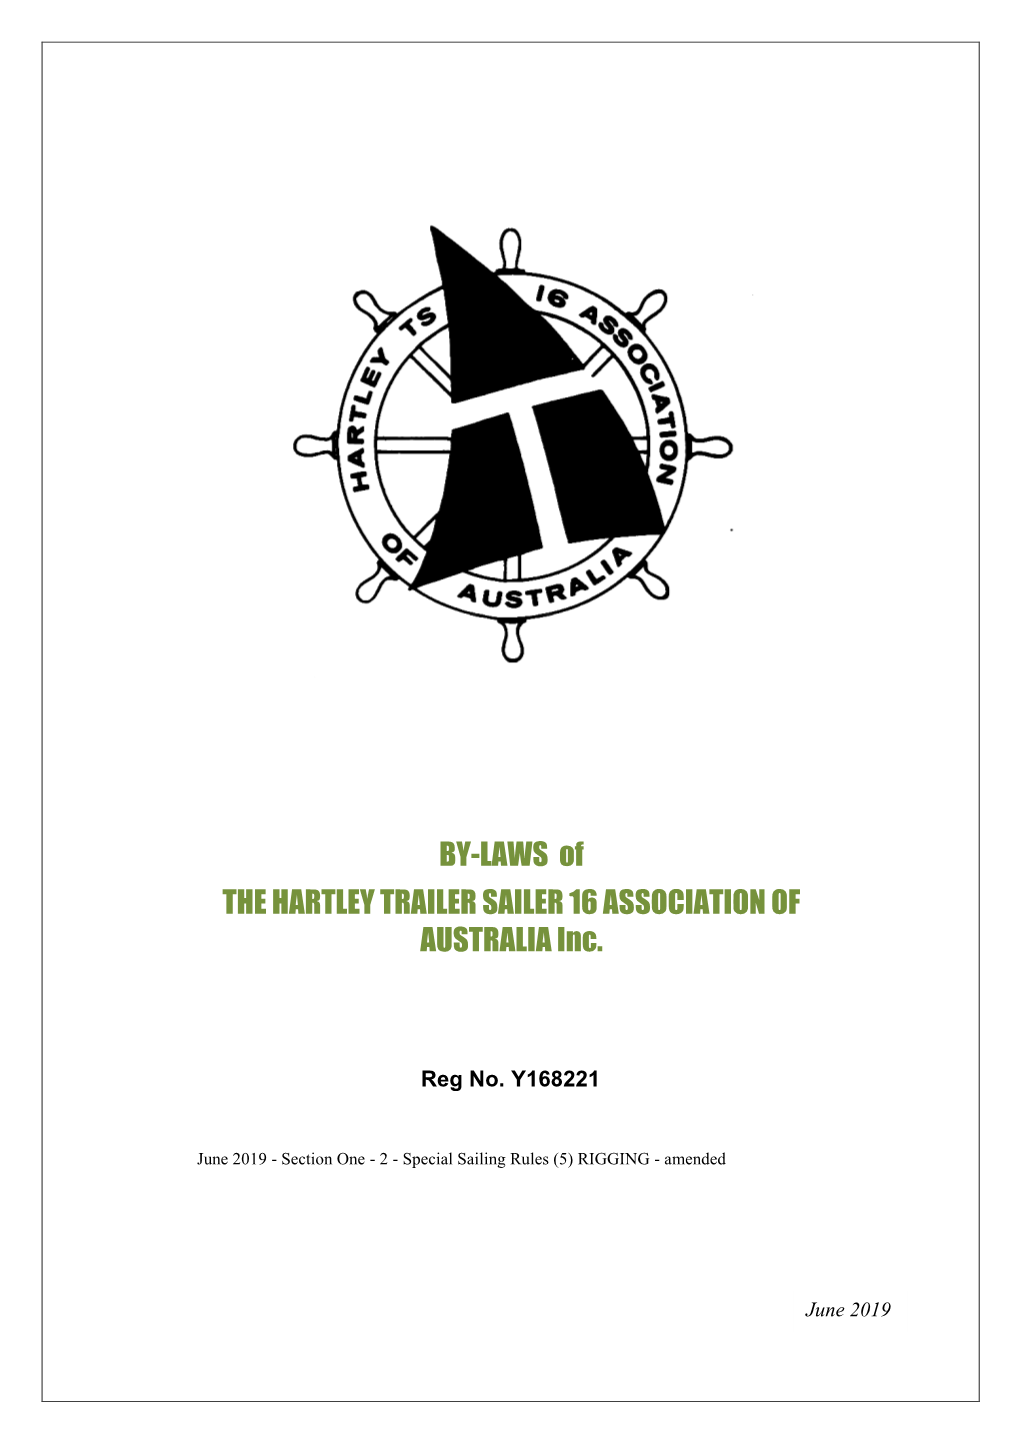 By-Laws of the Hartley Trailer Sailer 16 Association of Australia Inc